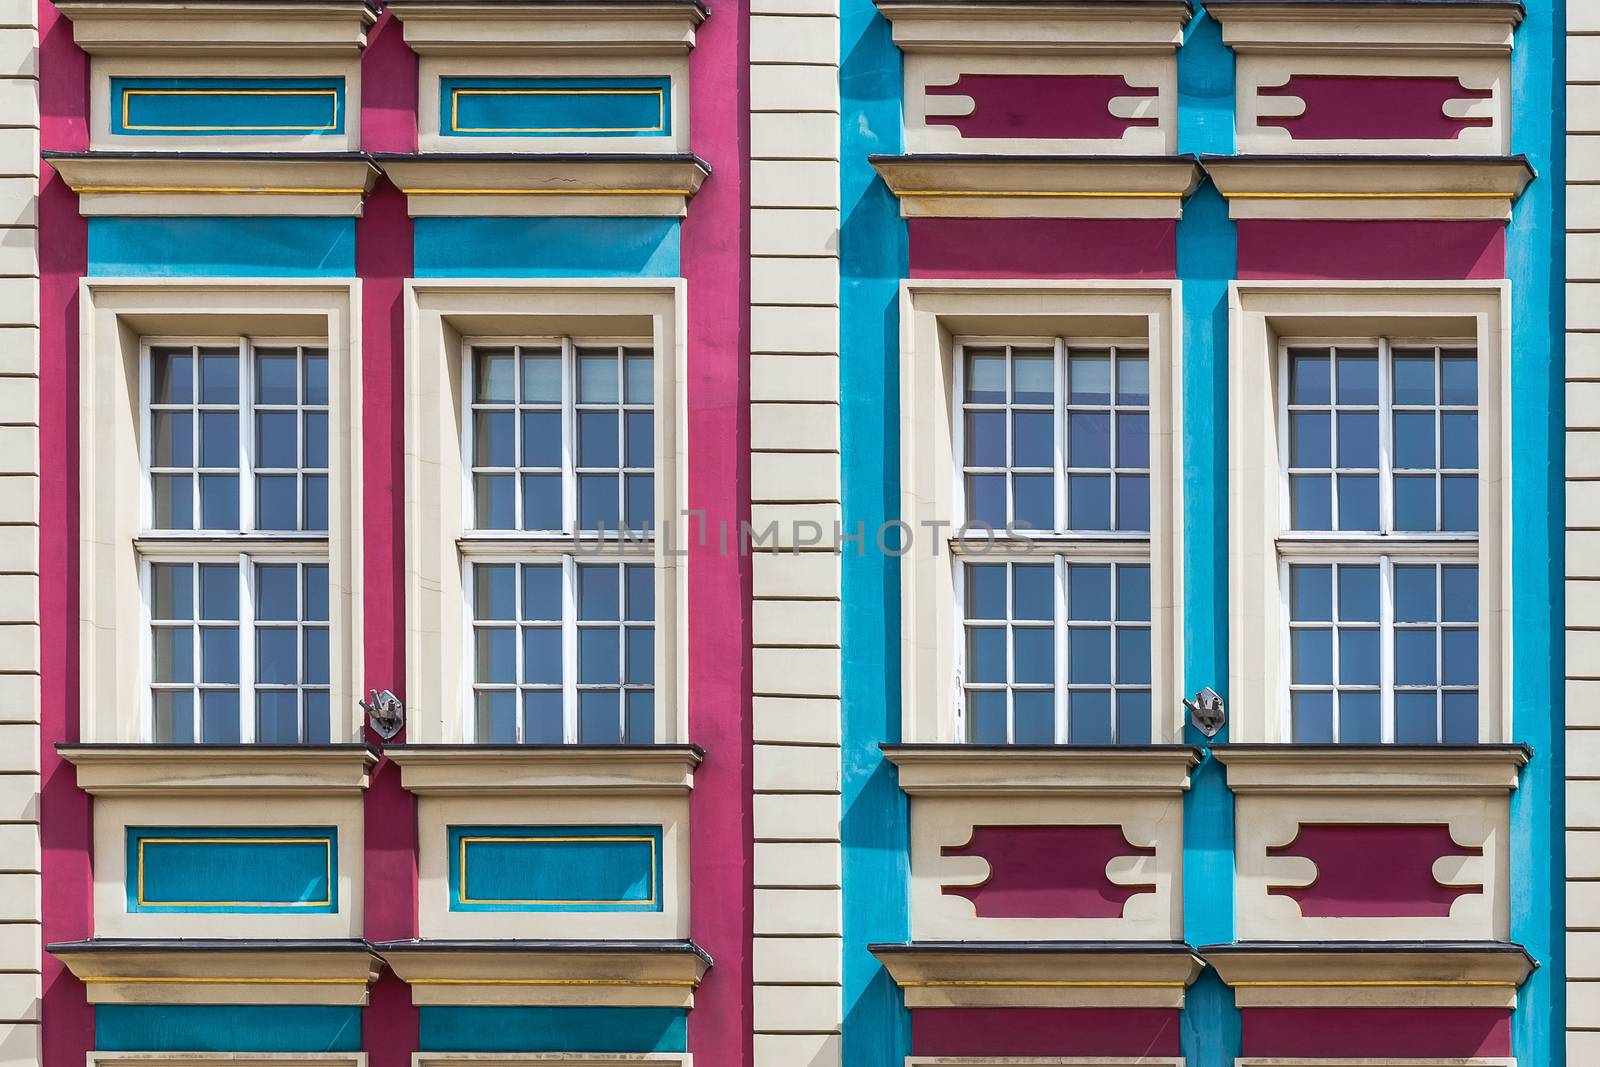 Facade of ancient tenement in the Old Town in Wroclaw, Poland.